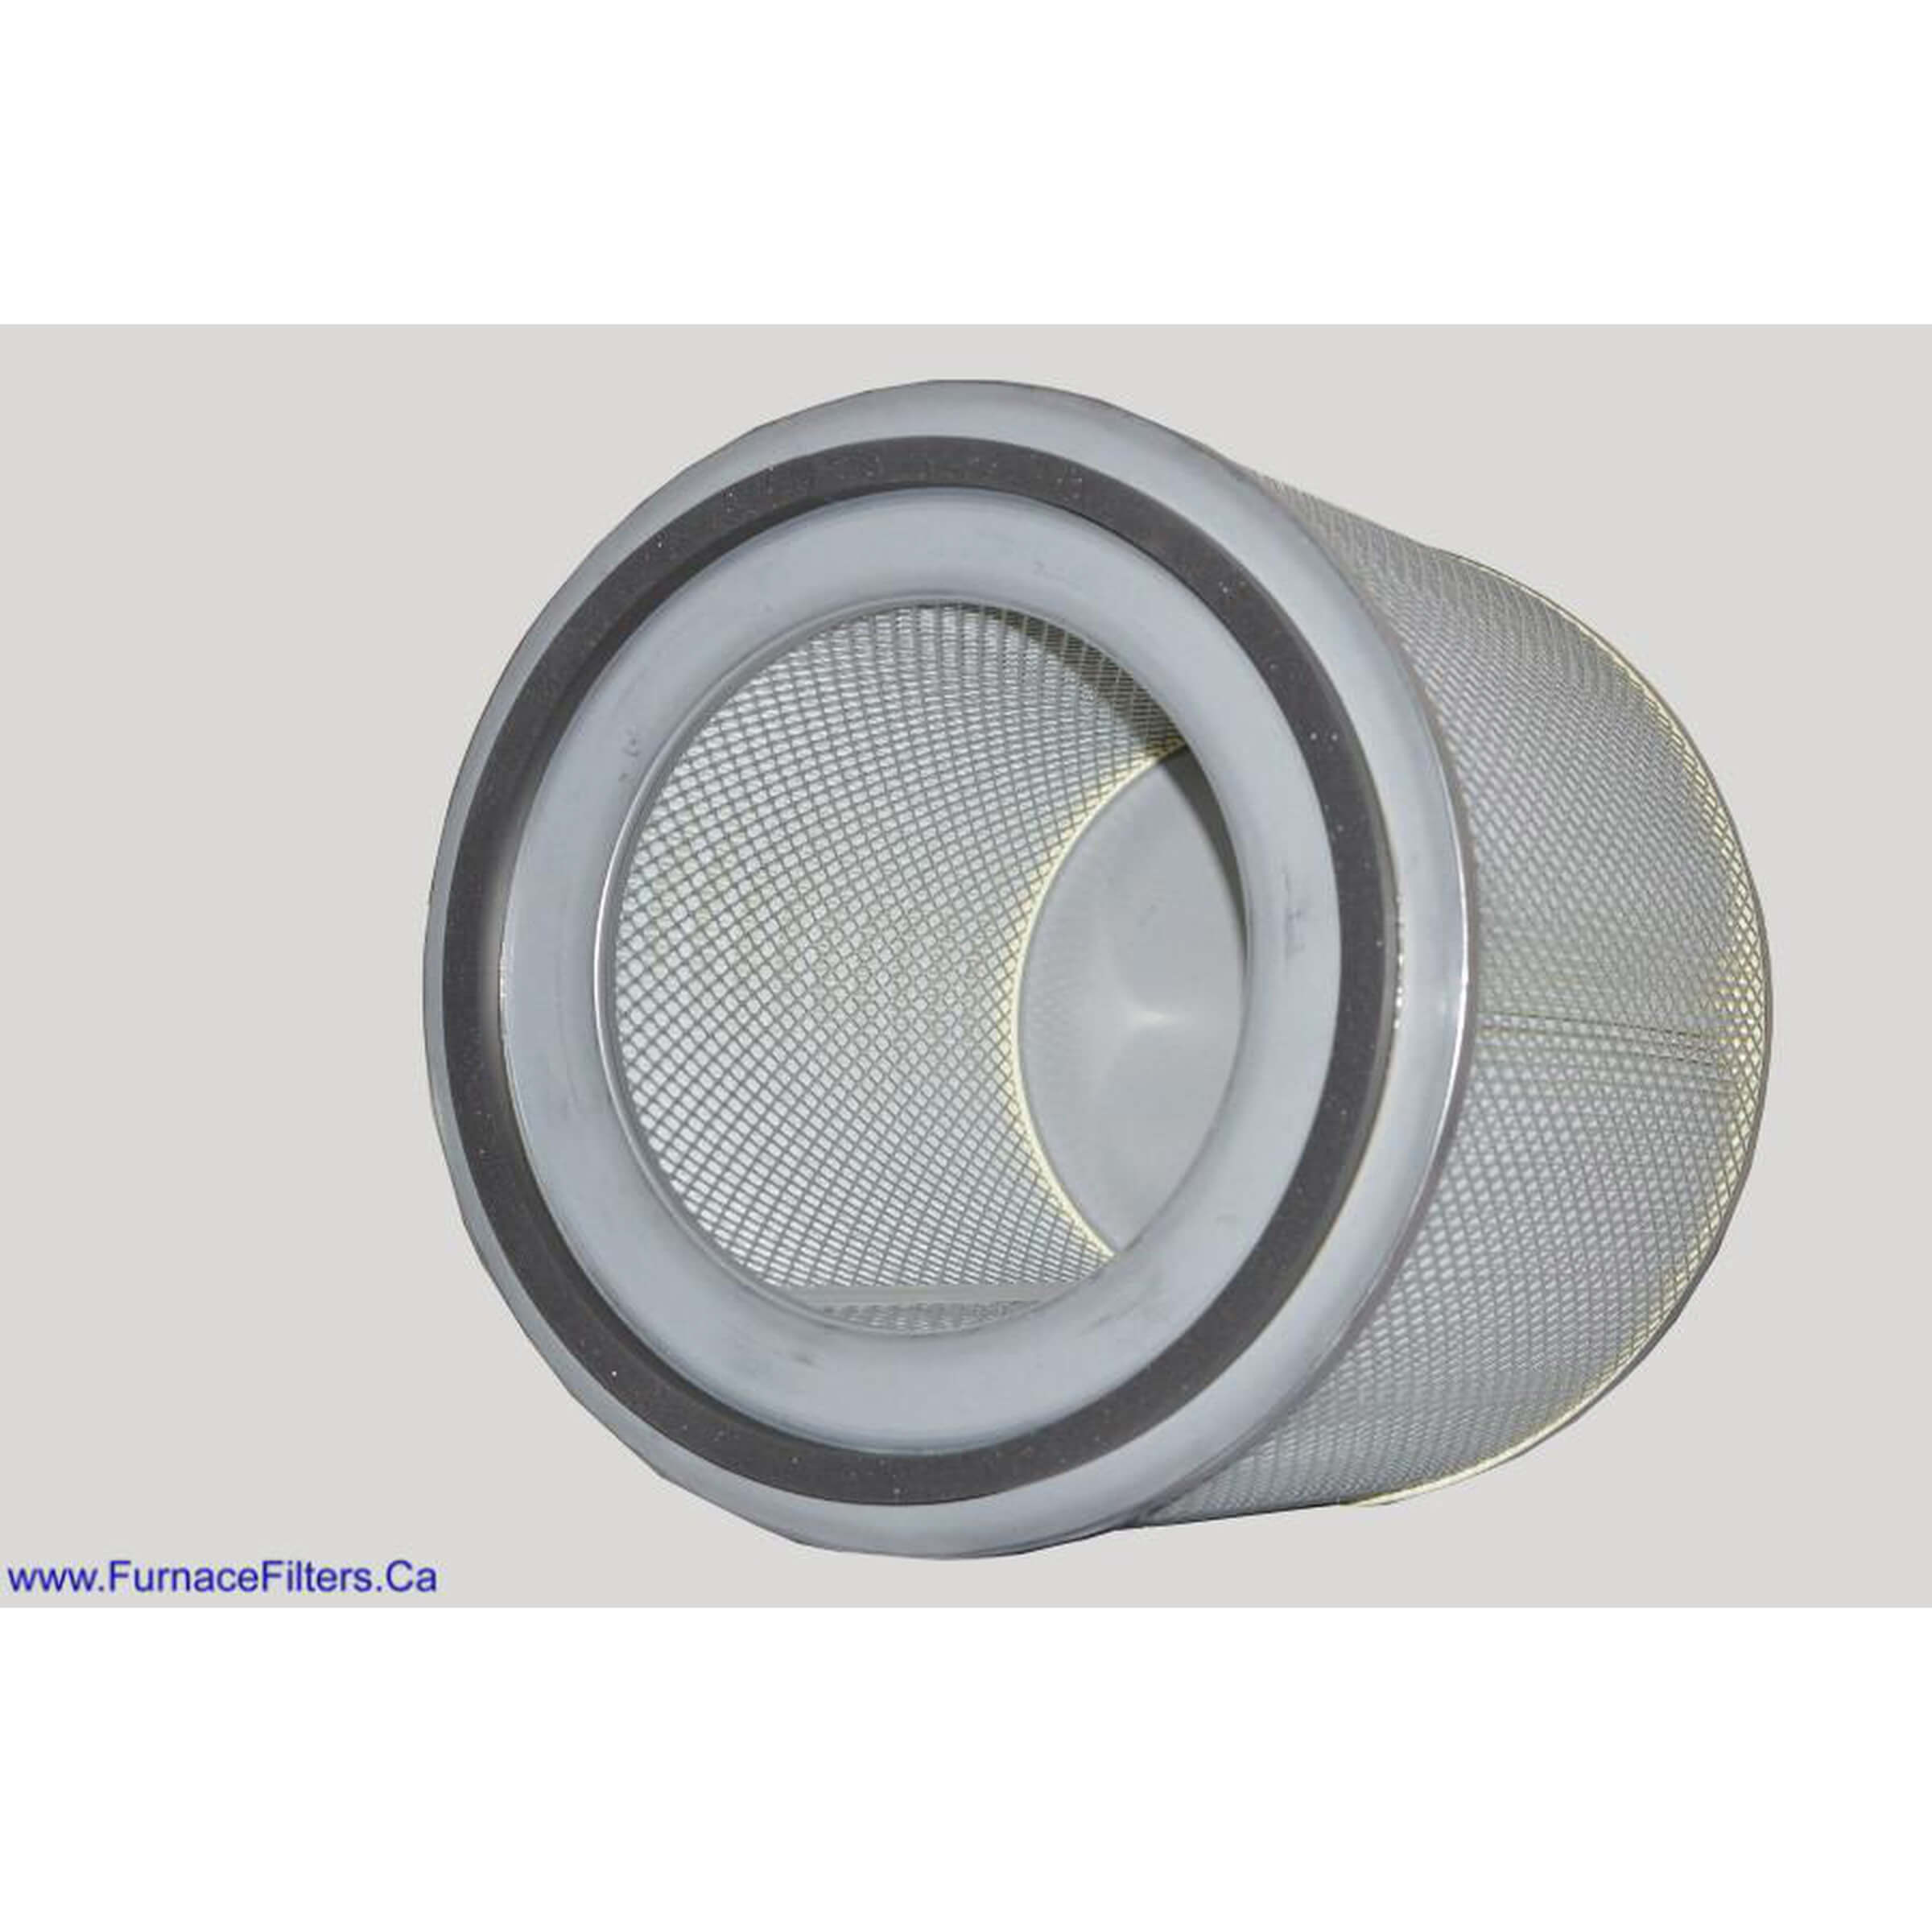 Electro Air W4-0840 Certified True Hepa Filter Cylinder for Model 450 Hepa Air Cleaner